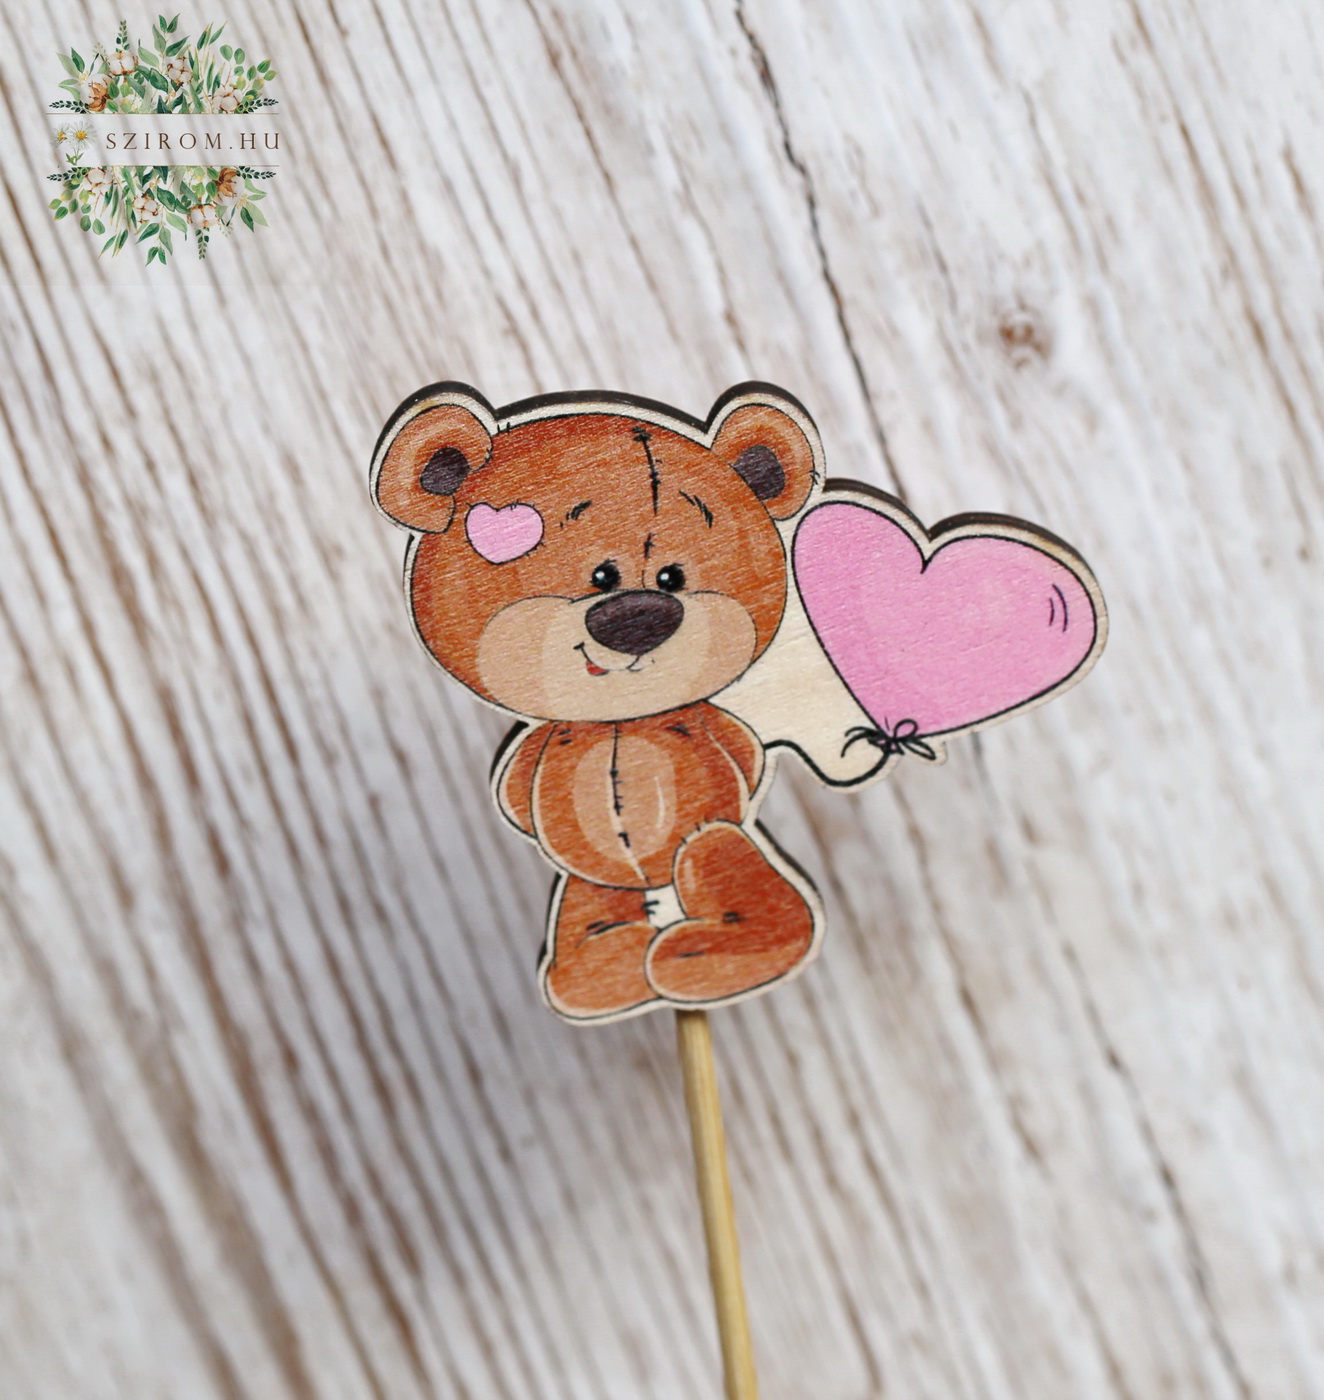 flower delivery Budapest - Teddy with heart wooden figure on stick 8 cm